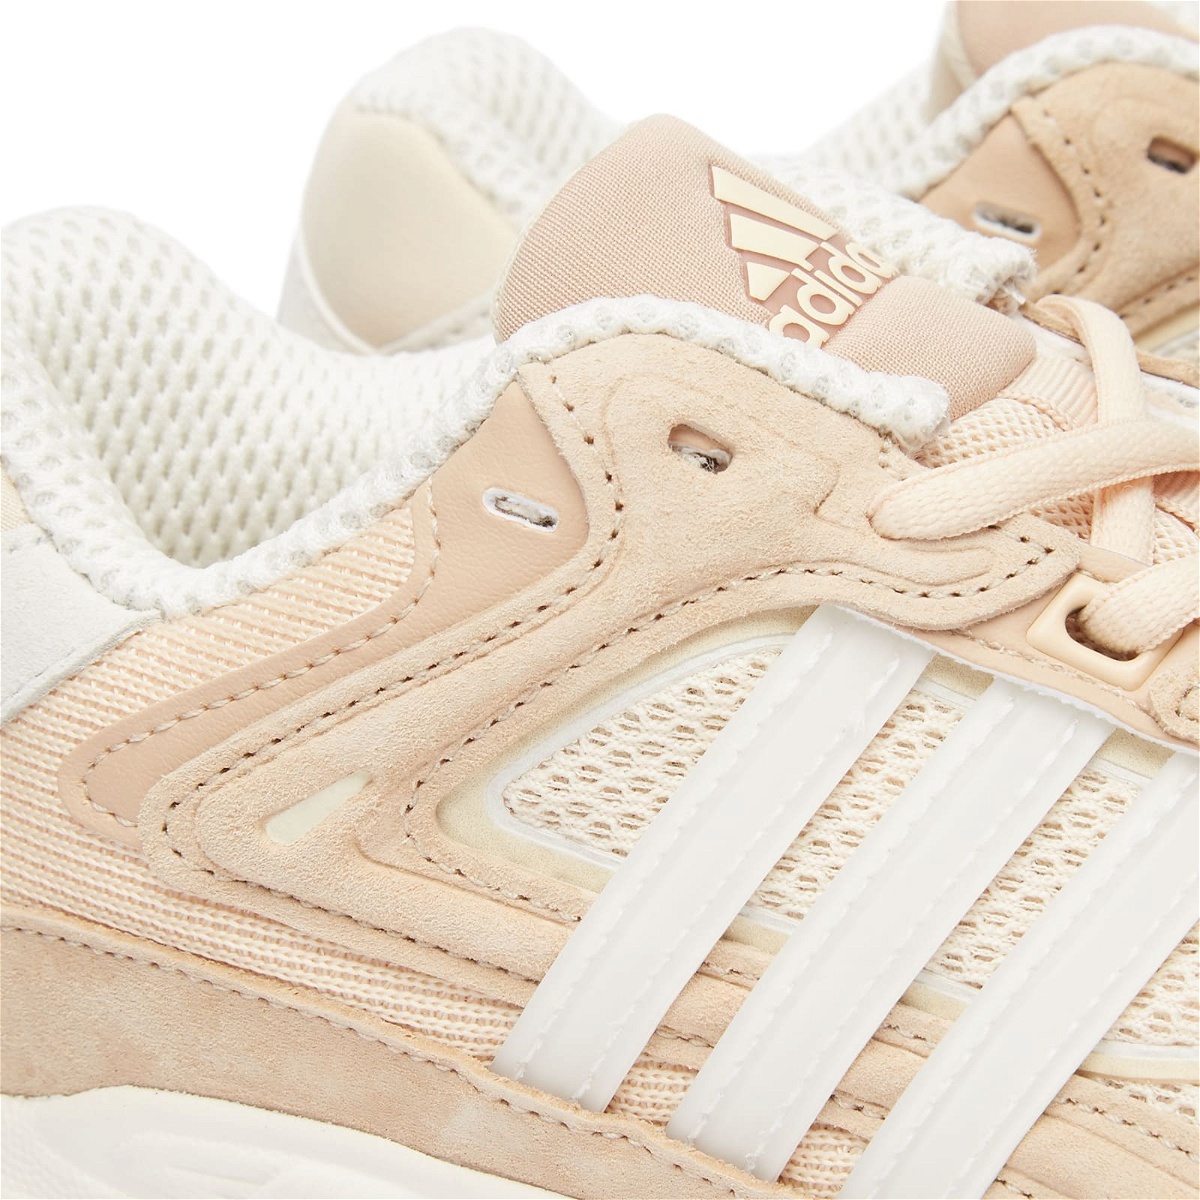 Adidas Response CL Sneakers adidas Sand/Off White/Beige in